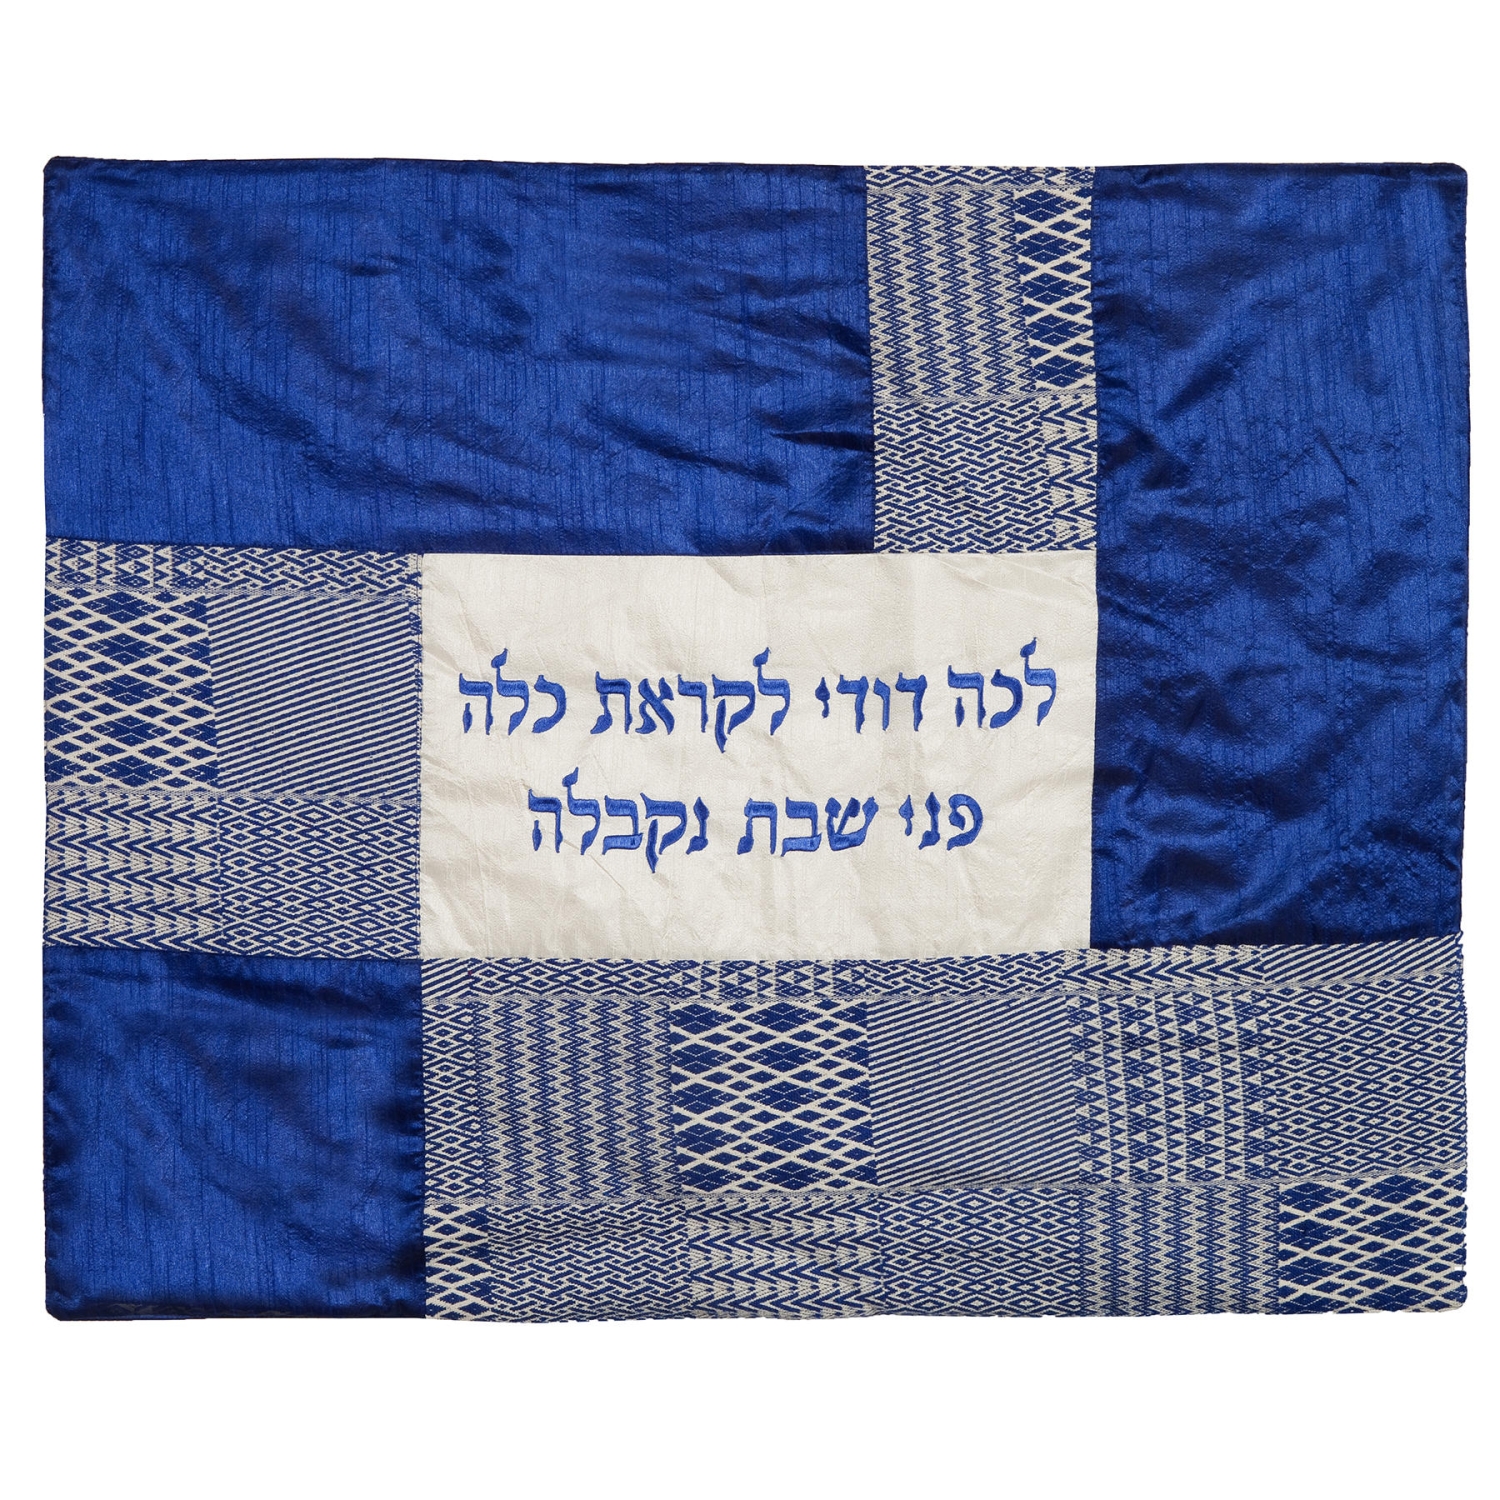 Yair Emanuel Embroidered Plata Cover (Hot Plate Cover) - Fabric Collage - Blue - 1